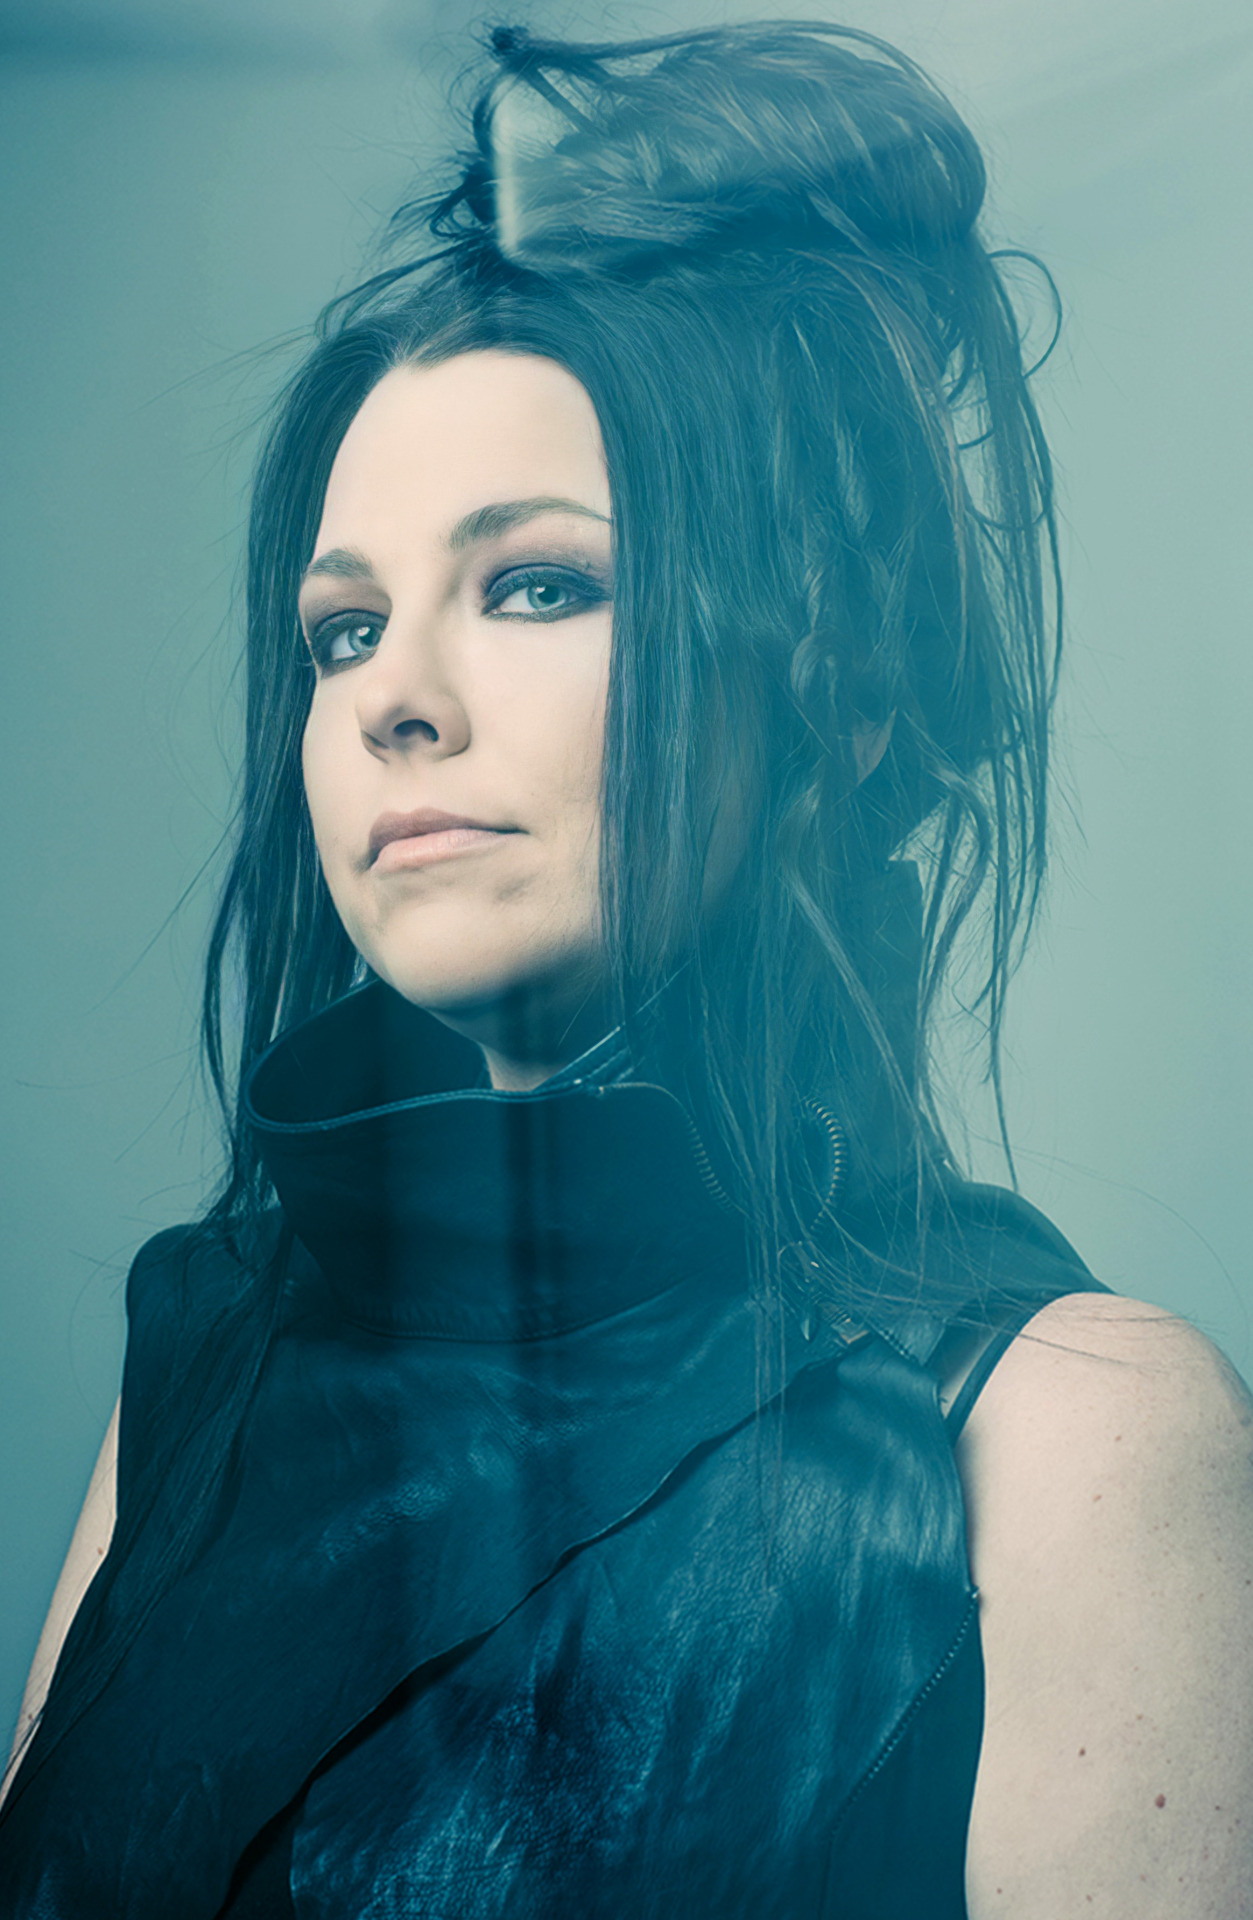 1253x1920
Keywords: amy lee;blue;photoshoot;the bitter truth;sesion;hq